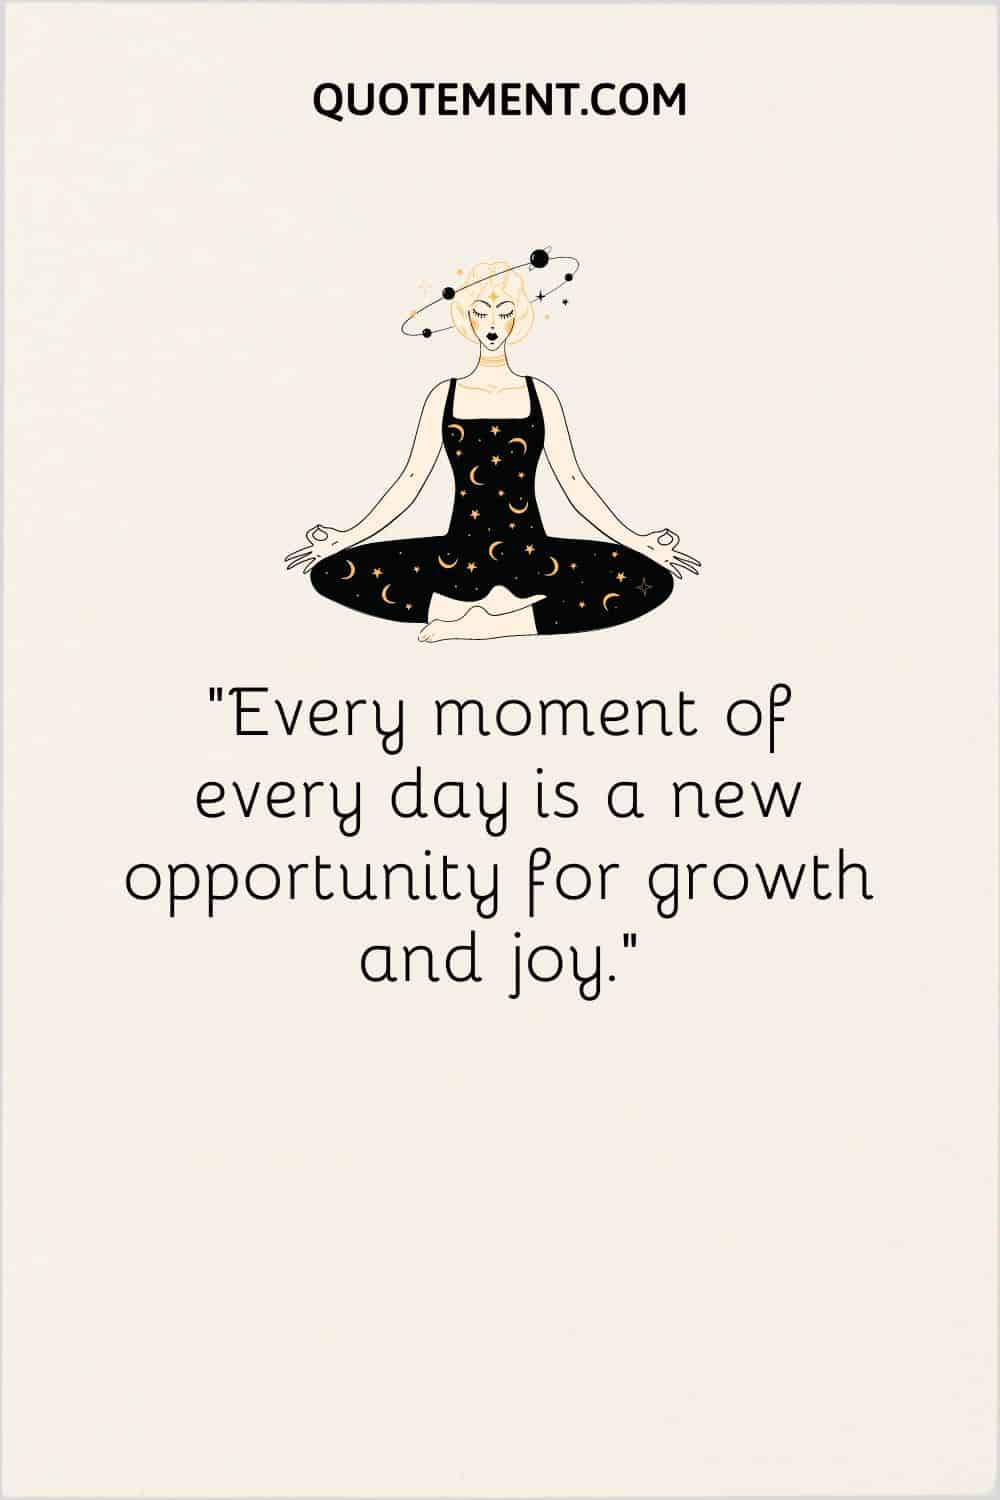 Every moment of every day is a new opportunity for growth and joy